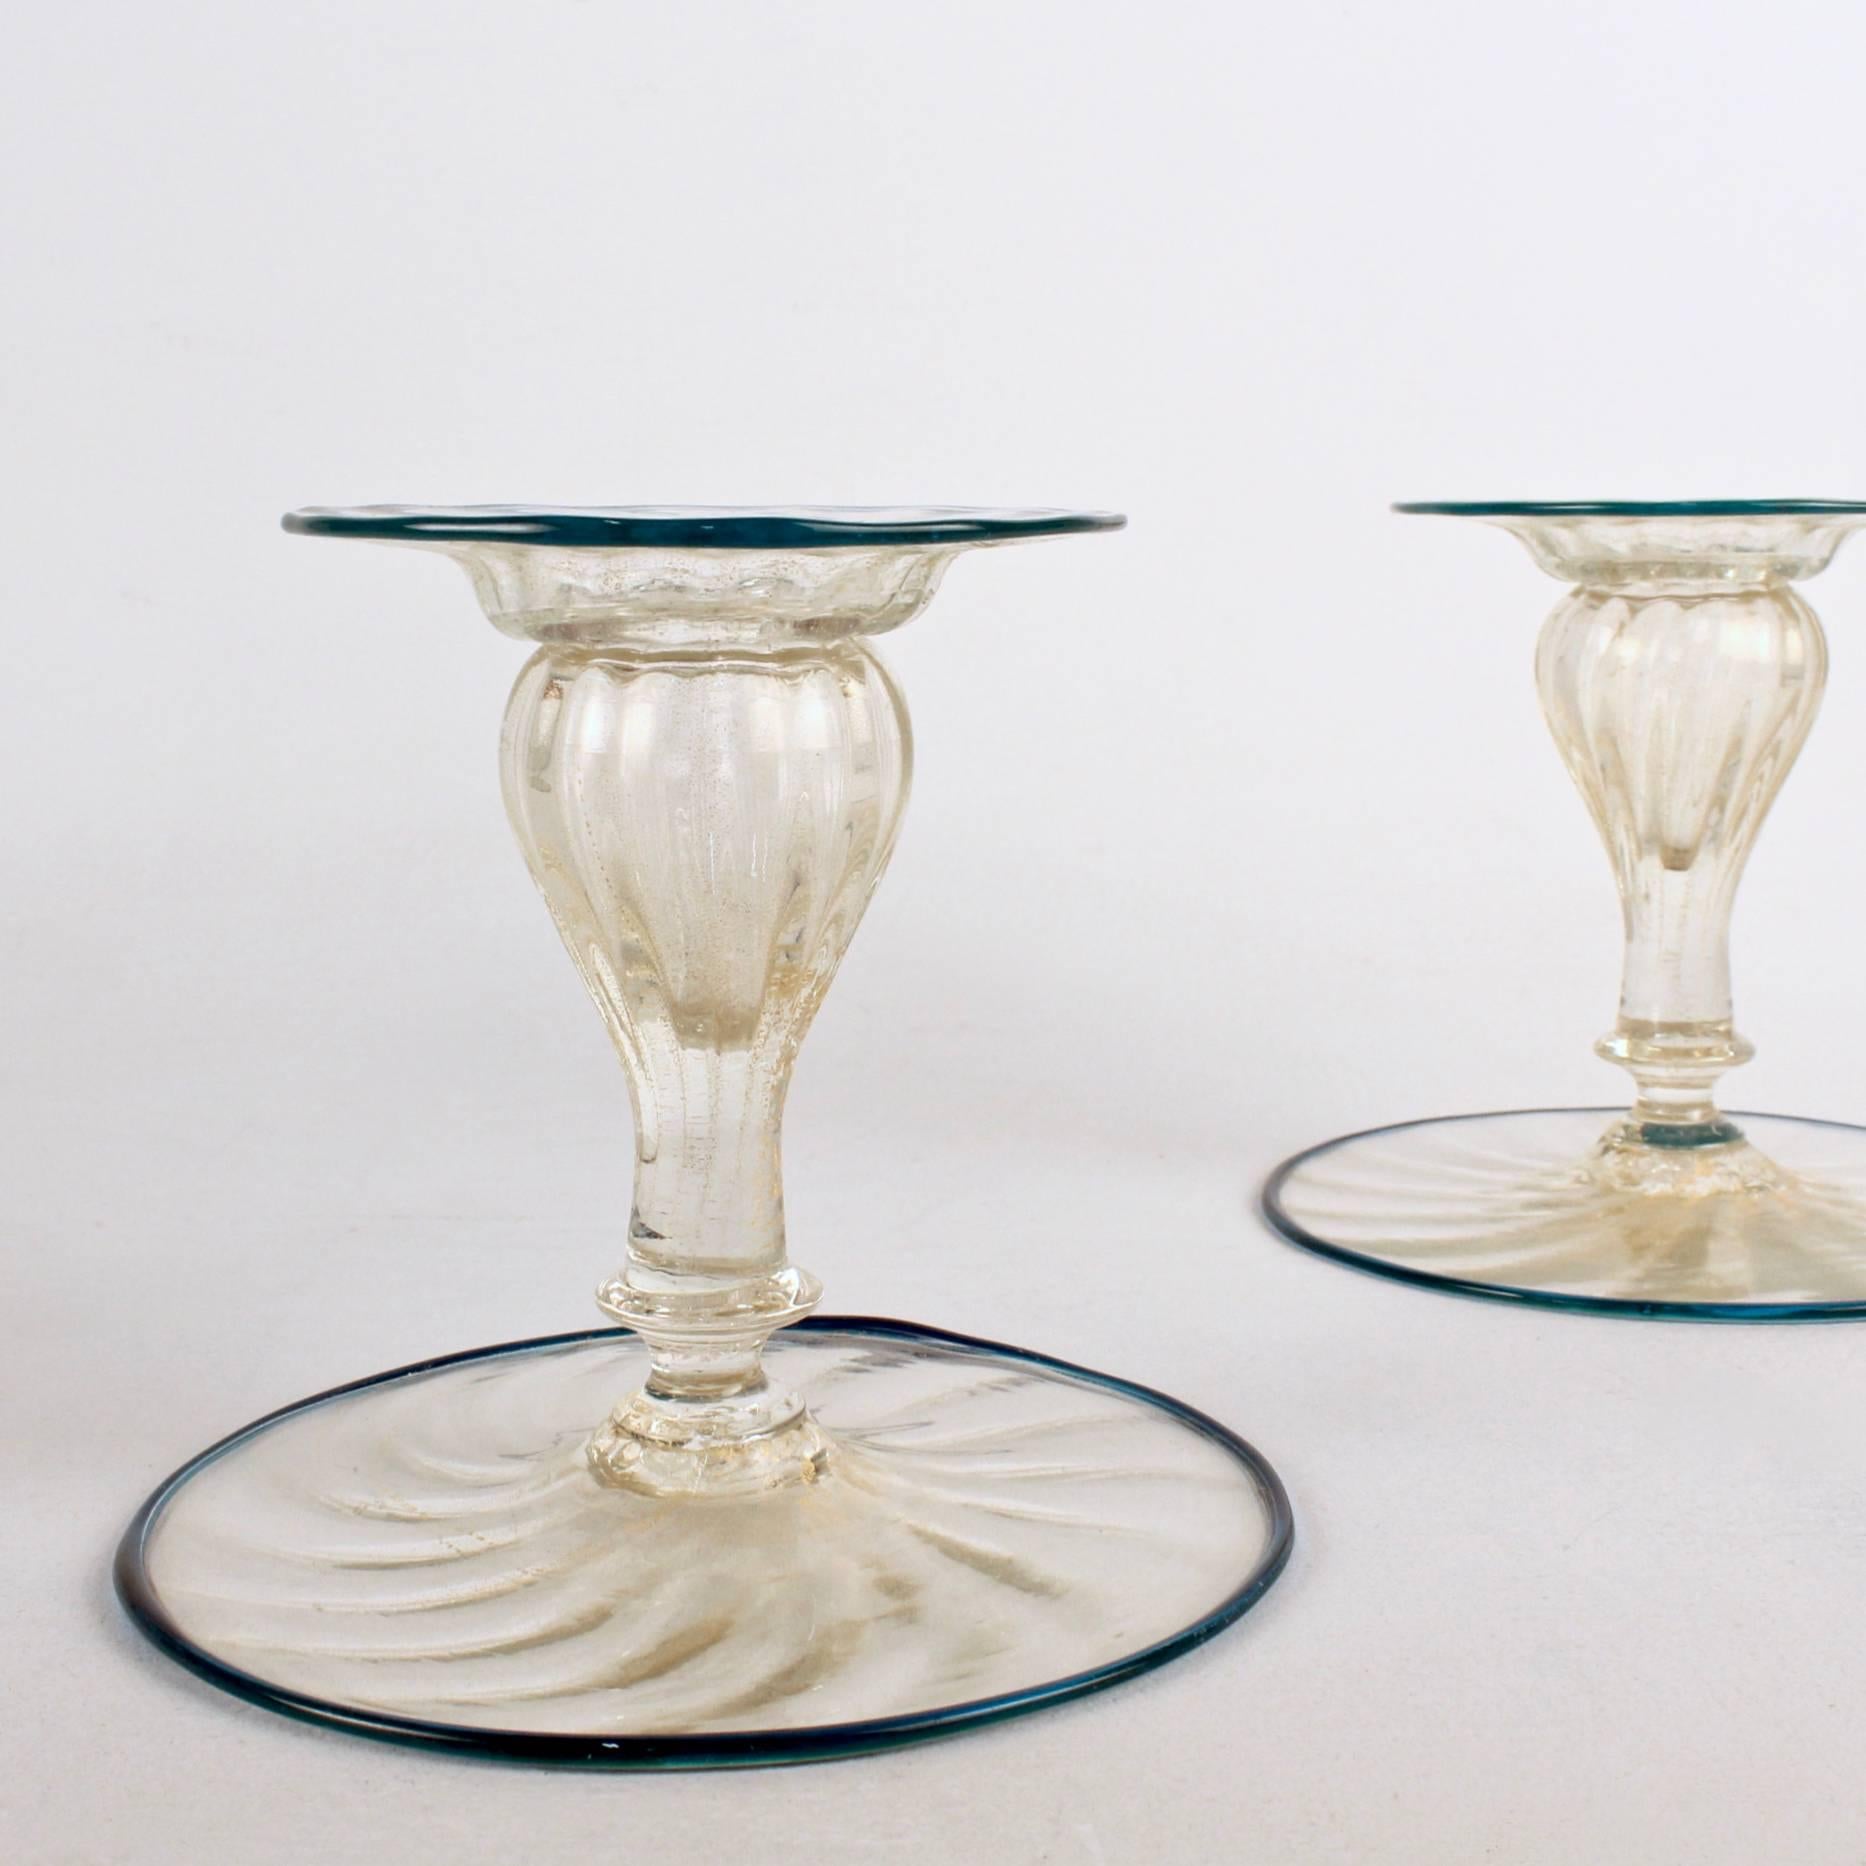 A set of four Venetian glass candlesticks. 

They consist of light amber glass with gold fleck inclusions with a left handed swirl and applied teal ribbon edges. Each has a matching, removable bobeche. A real rarity. 

Likely Pauly or